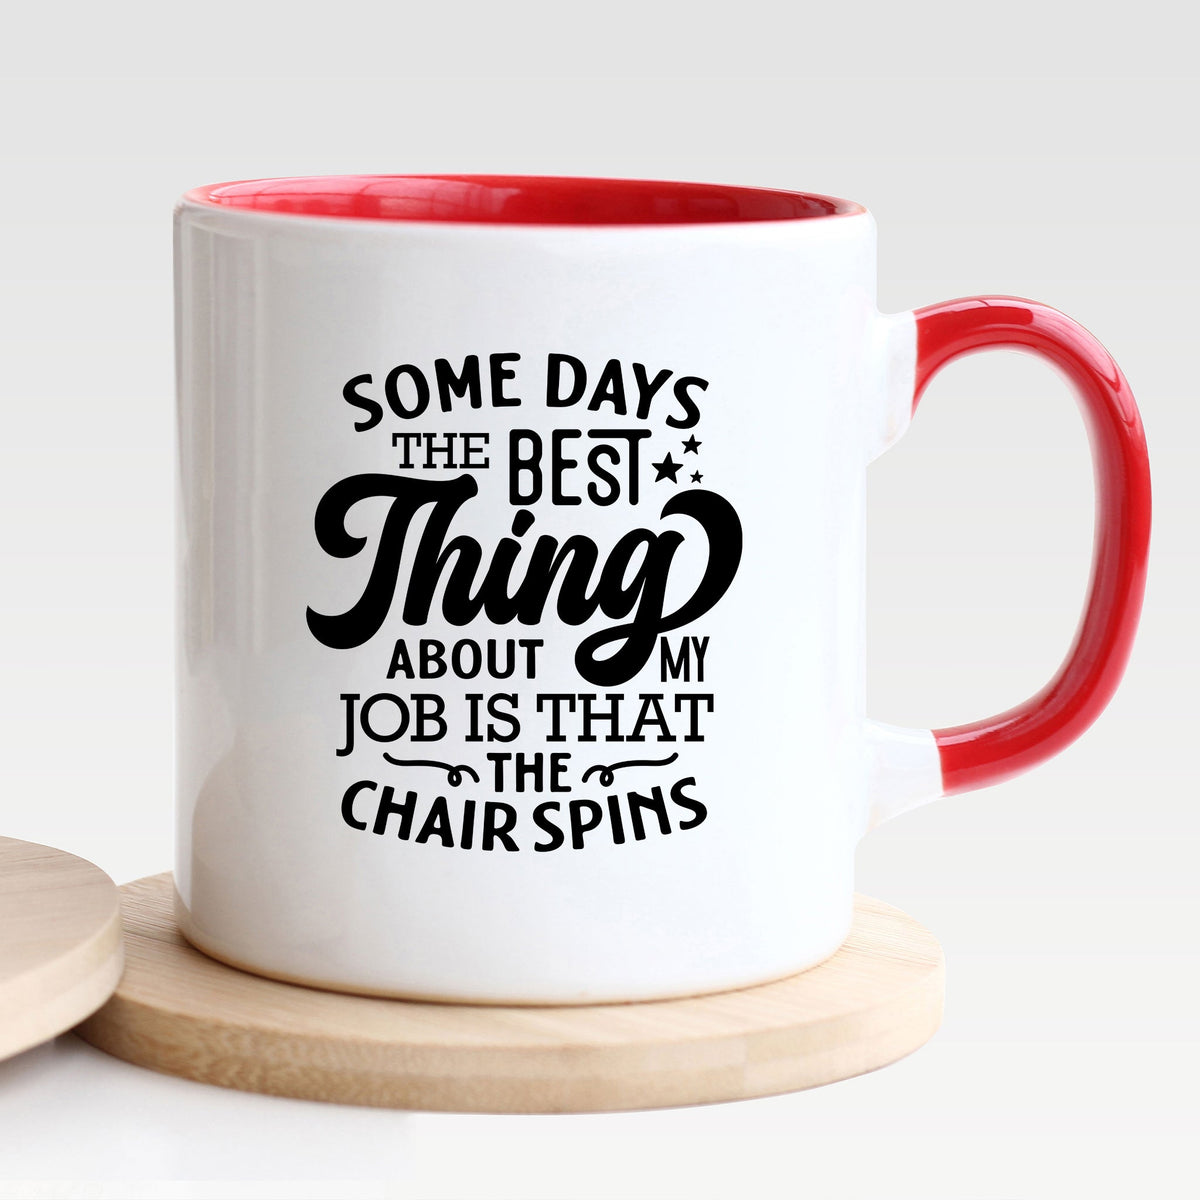 Some Days The Best Thing About My Job Is That The Chair Spins - Mug